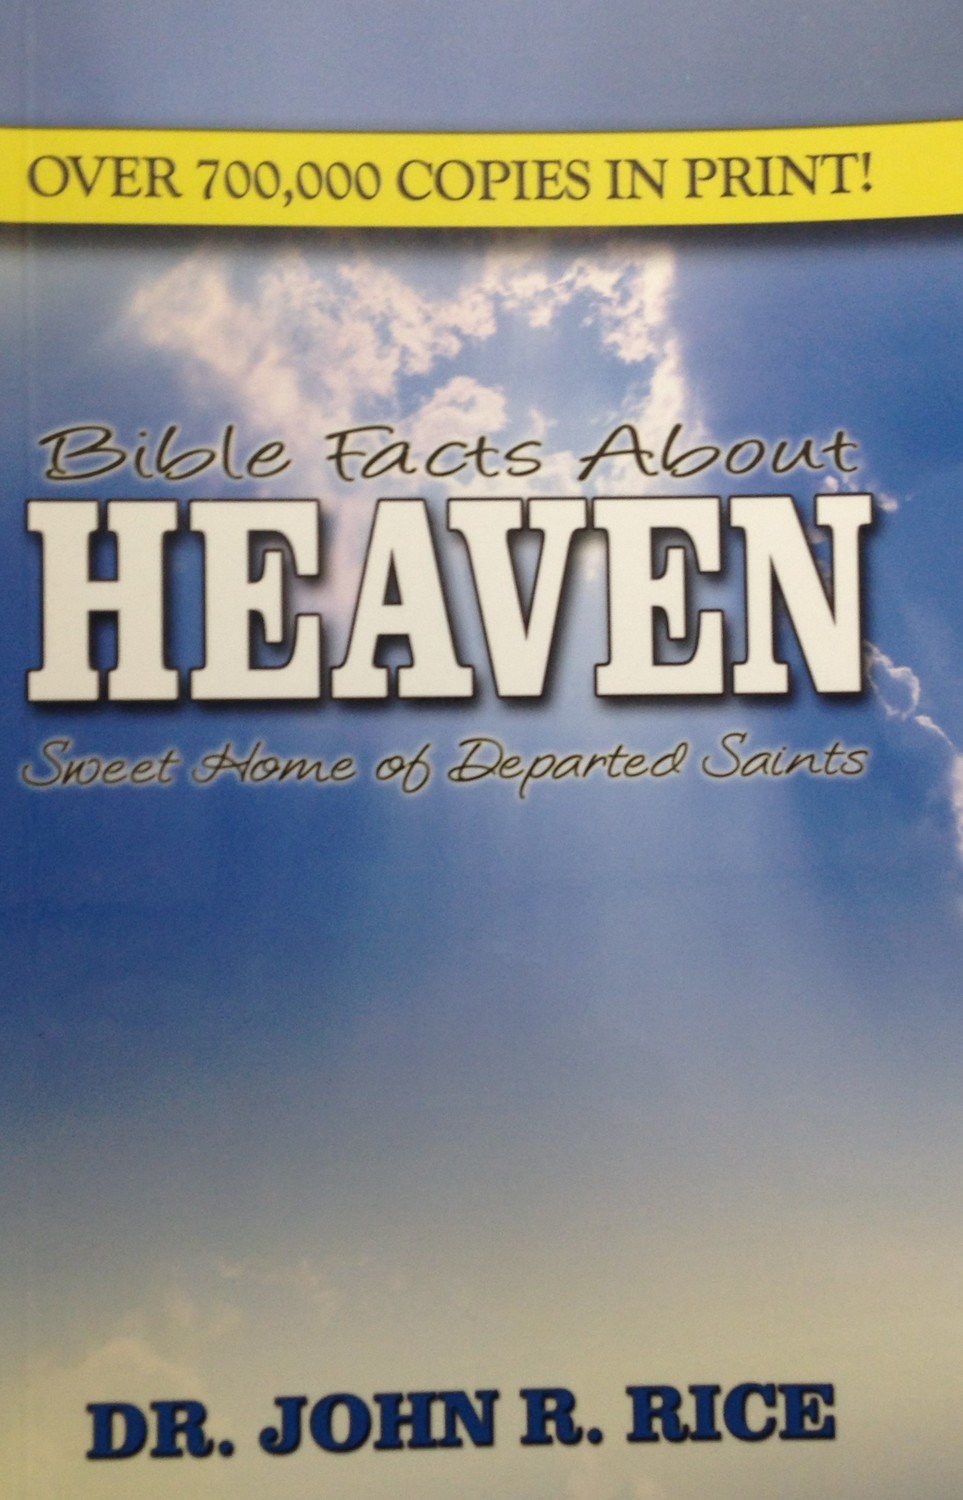 Bible Facts About Heaven:  Sweet Home of the Departed Saints by Dr. John R. Rice